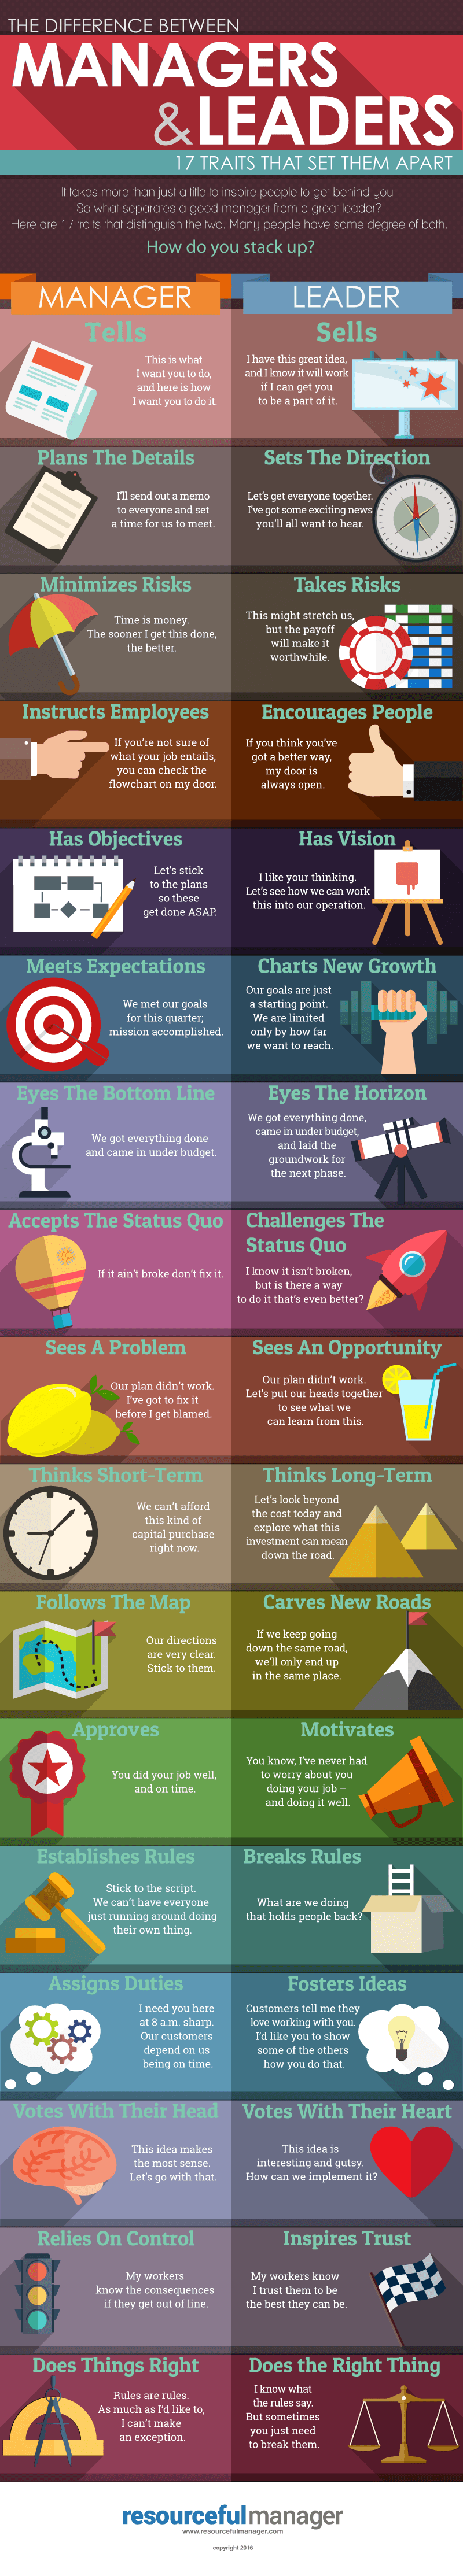 Leaders vs Managers: 17 Traits That Set Them Apart Infographic